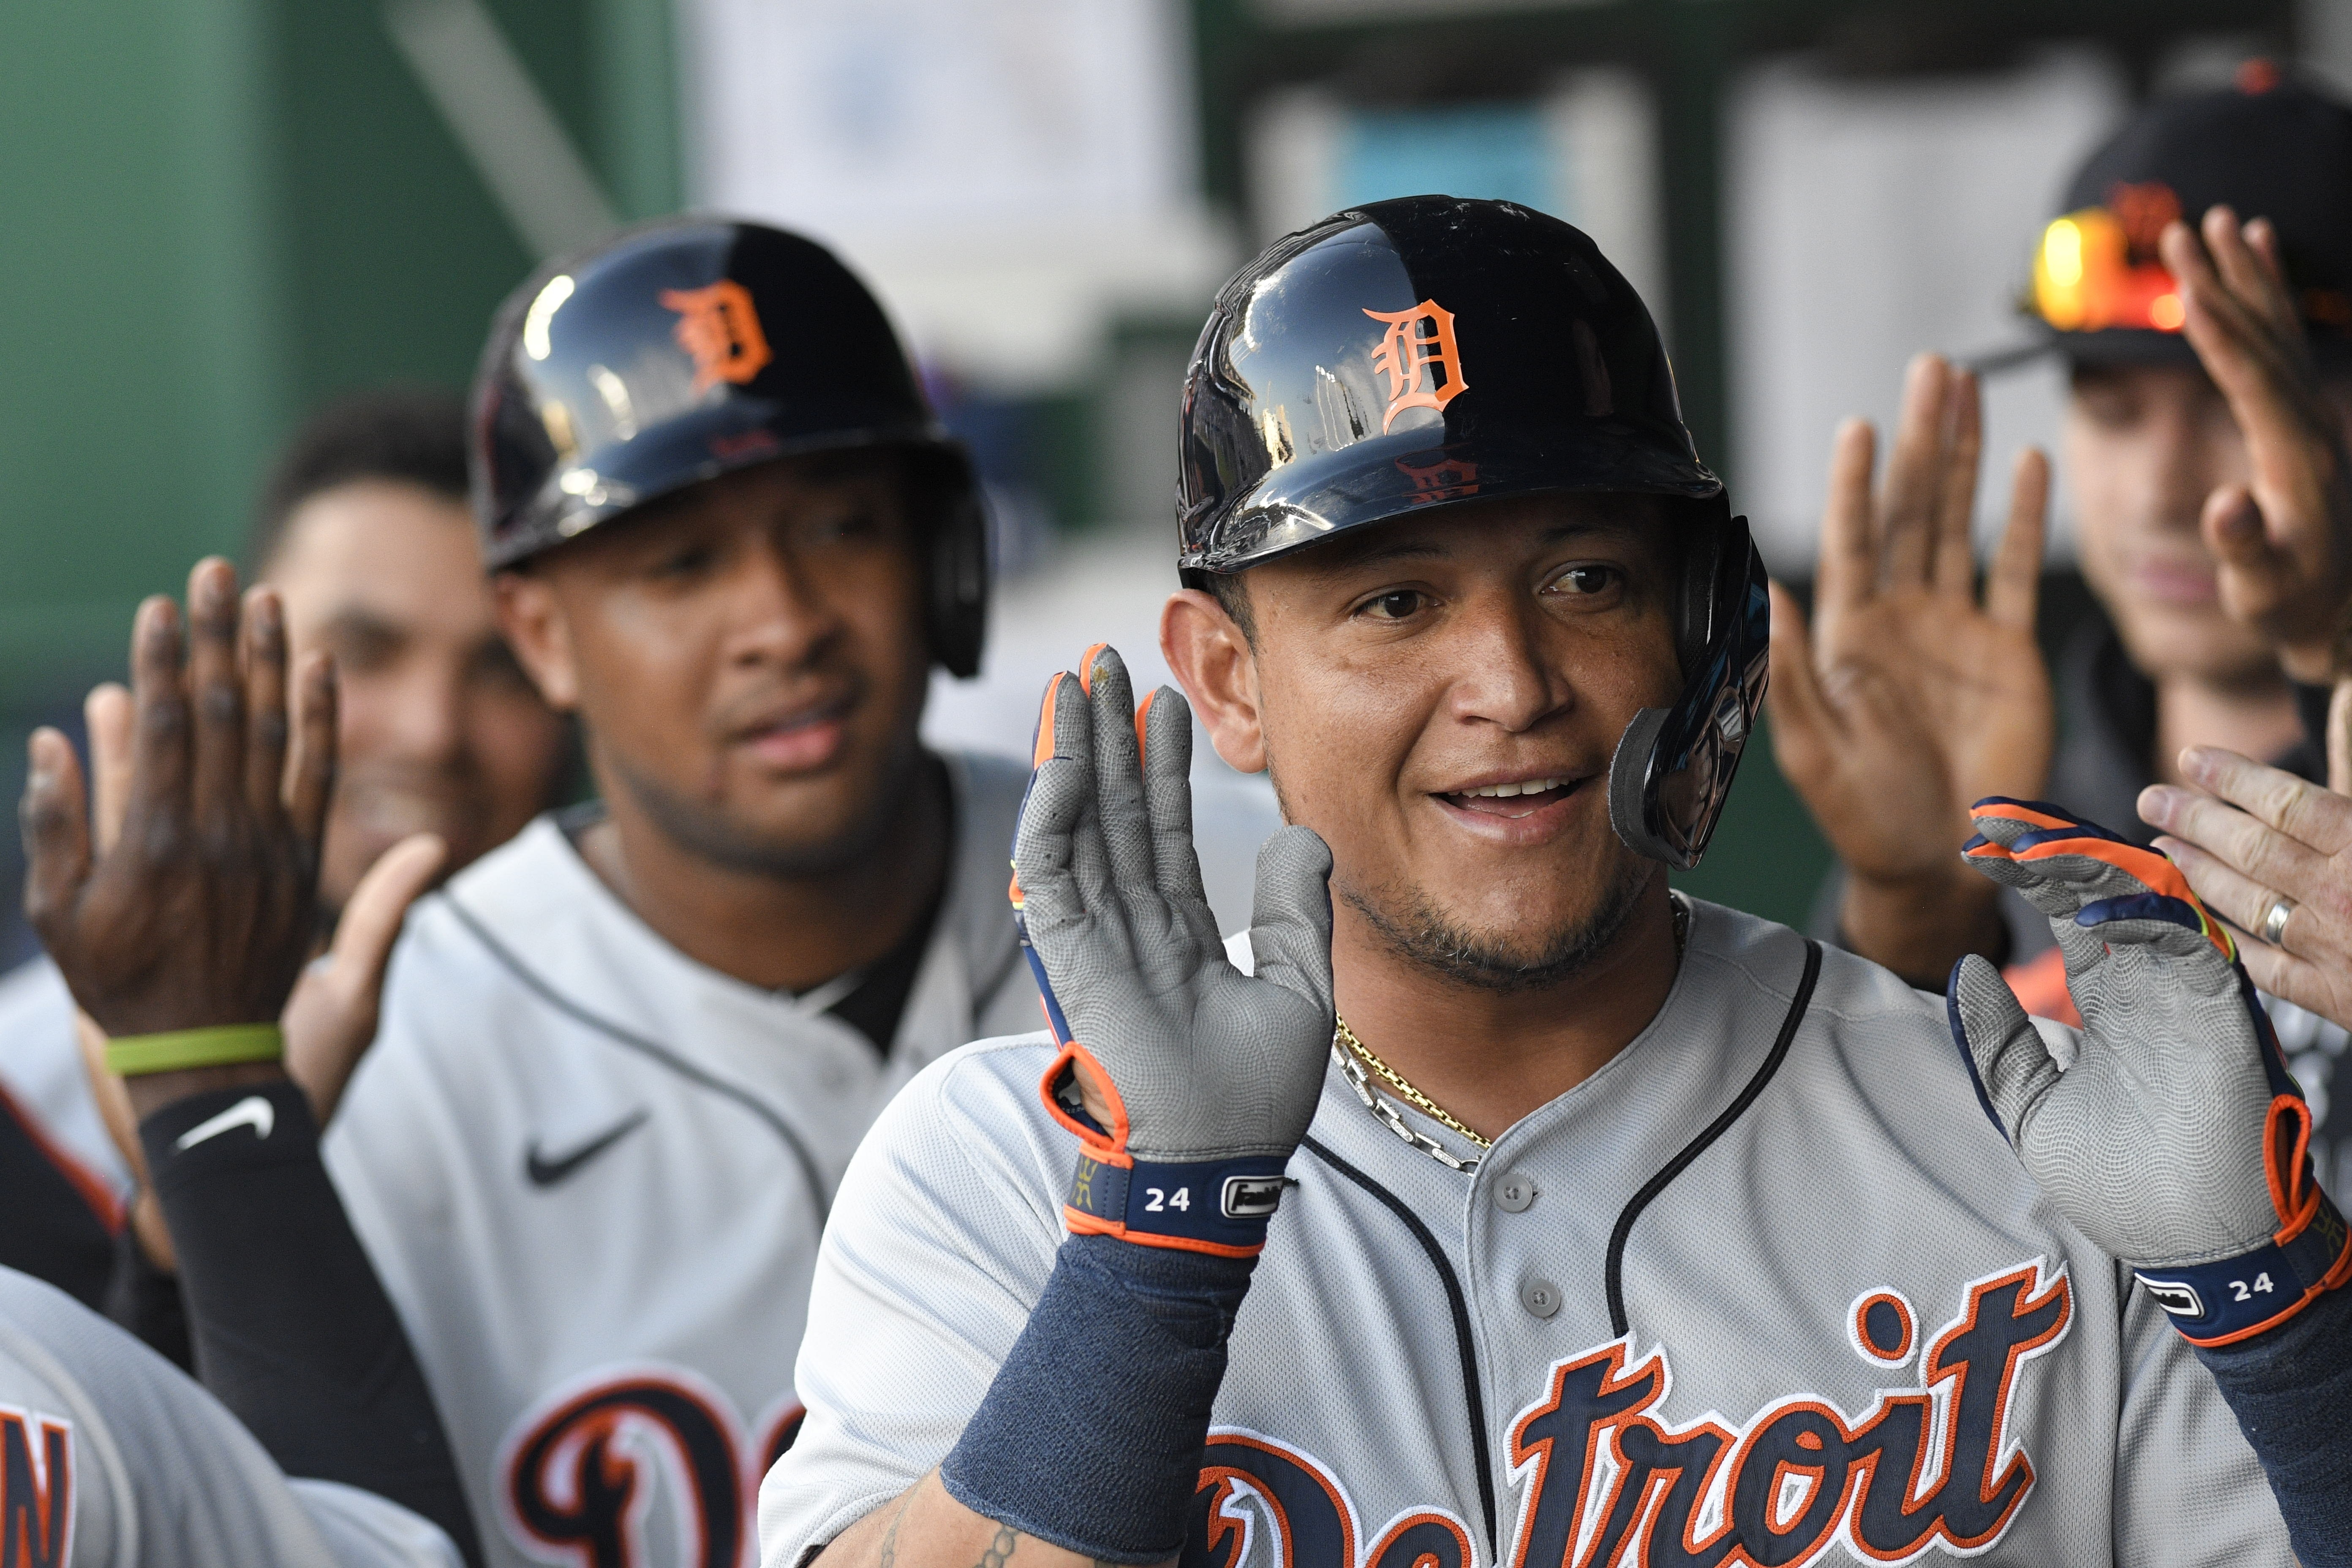 Tigers in WBC 2023: Jonathan Schoop coming back to Lakeland after